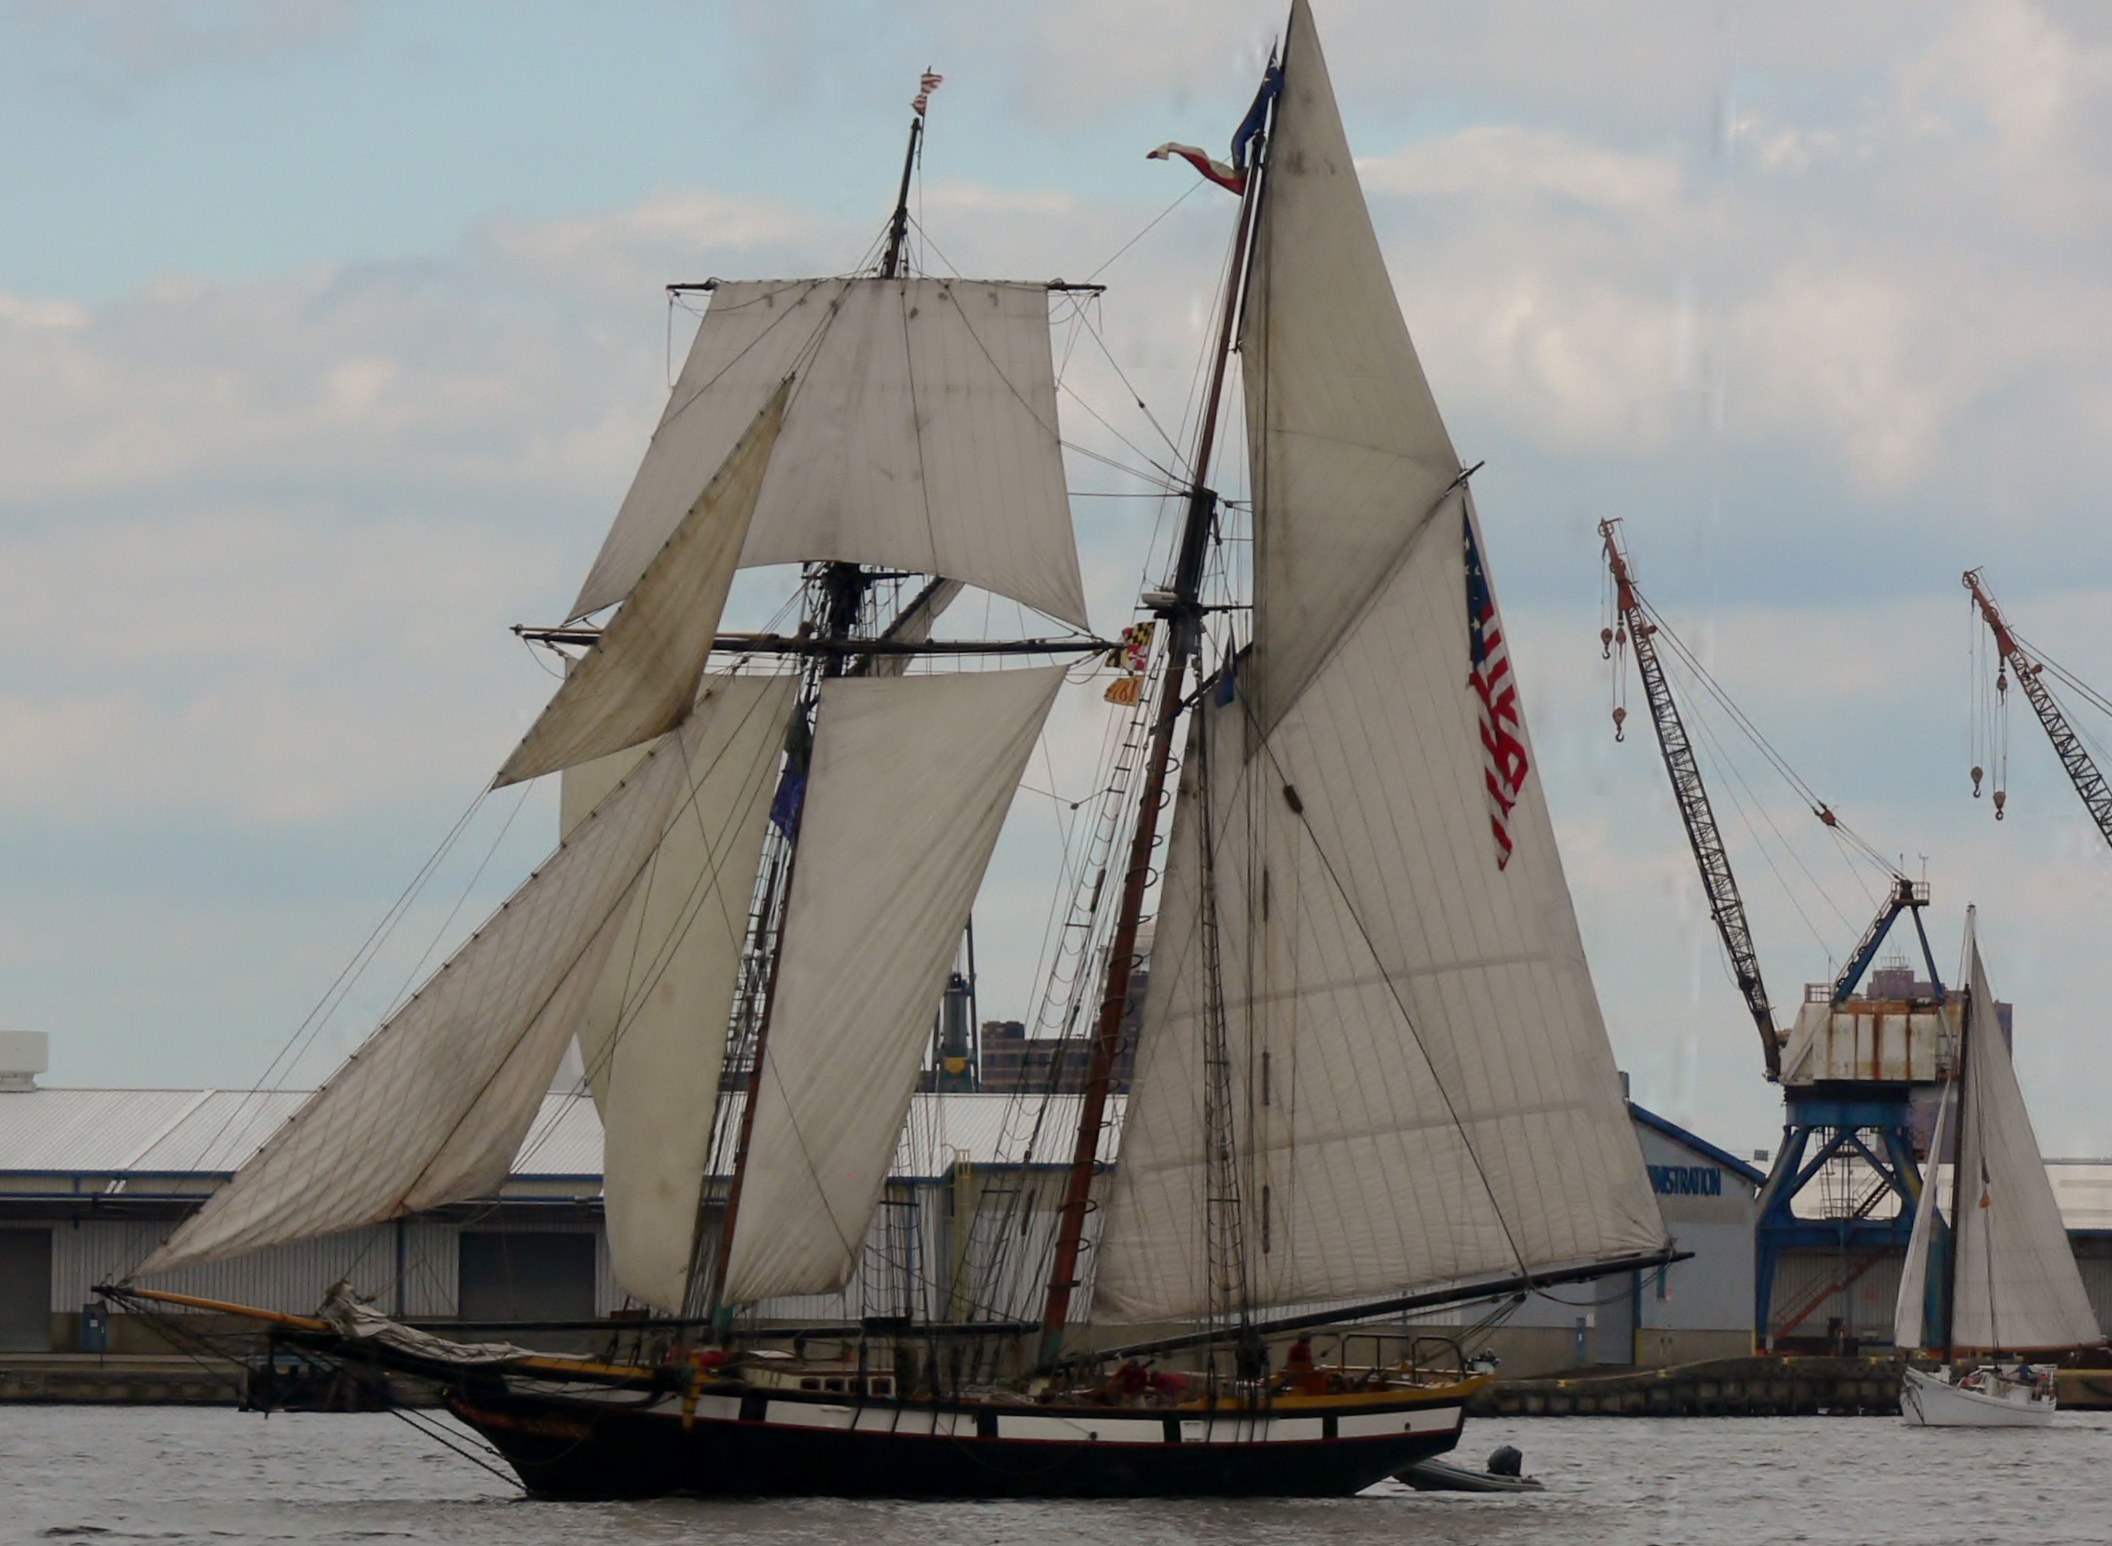 The Lynx is rigged similar to the Pride of Baltimore II. The original Lynx was a privateer built in Fells Point and was used during the War of 1812. Notice her split lower square sail on her foremast.